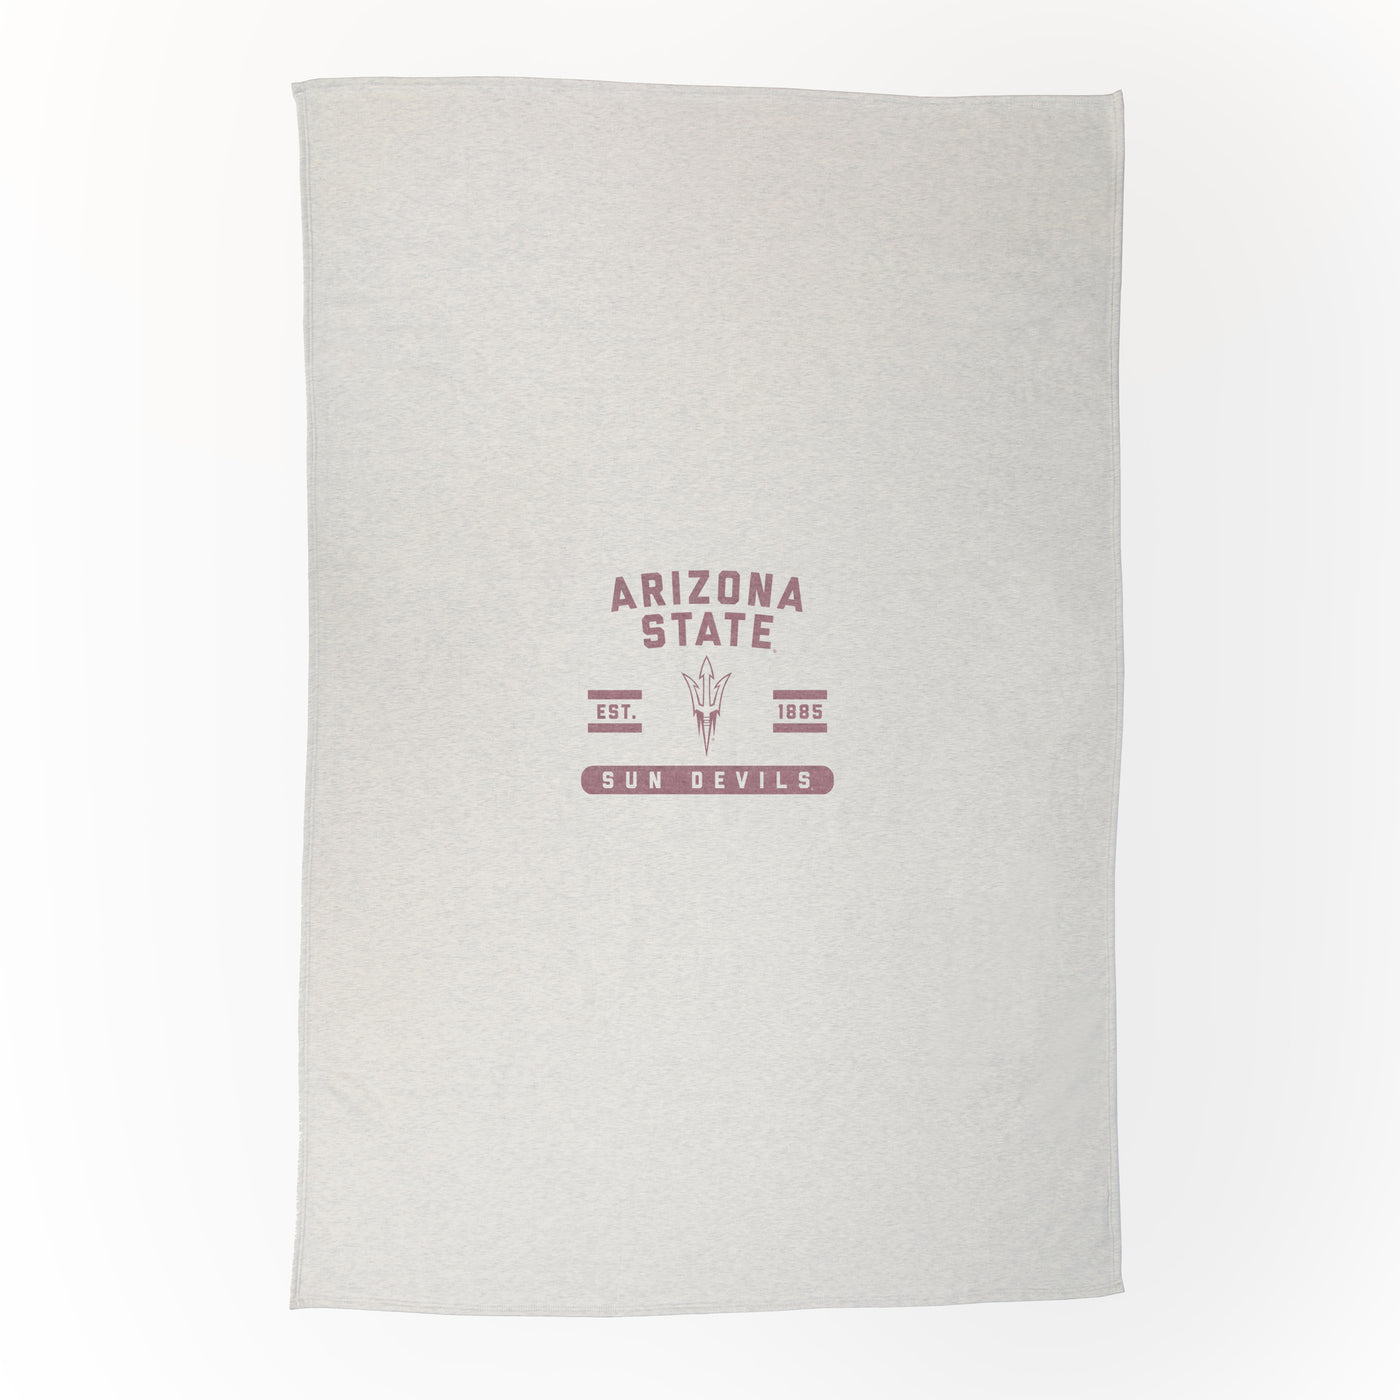 ASU oatlmeal colored blanket with the text 